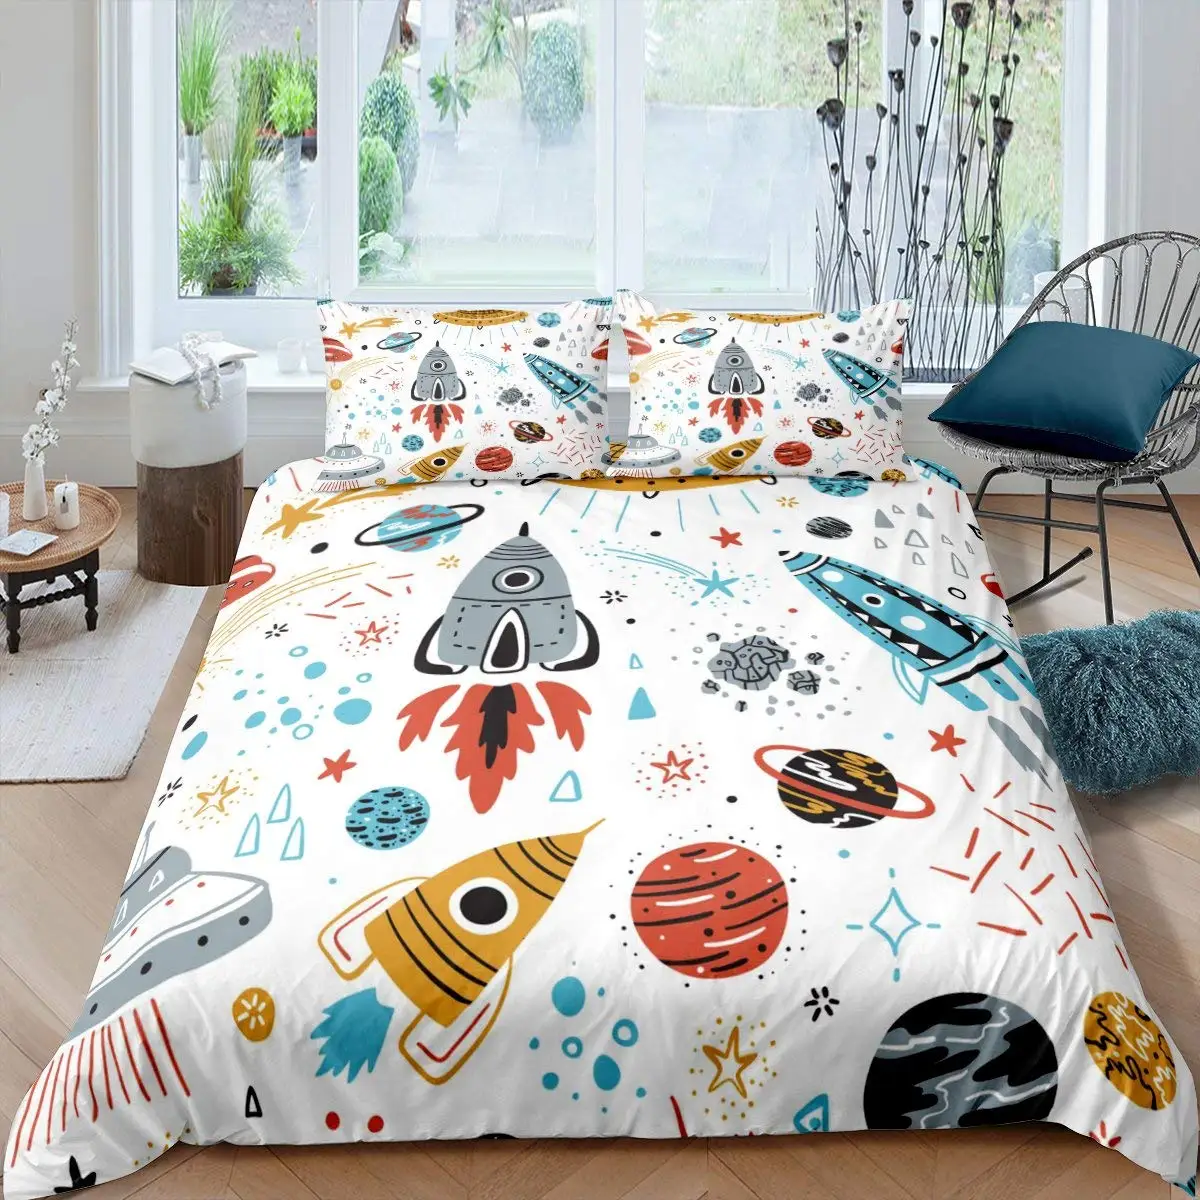 

Rocket Duvet Cover Set King Size Spaceship Bedding Set Twin Microfiber Outer Space Galaxy Stars Planet Cartoon Style Quilt Cover